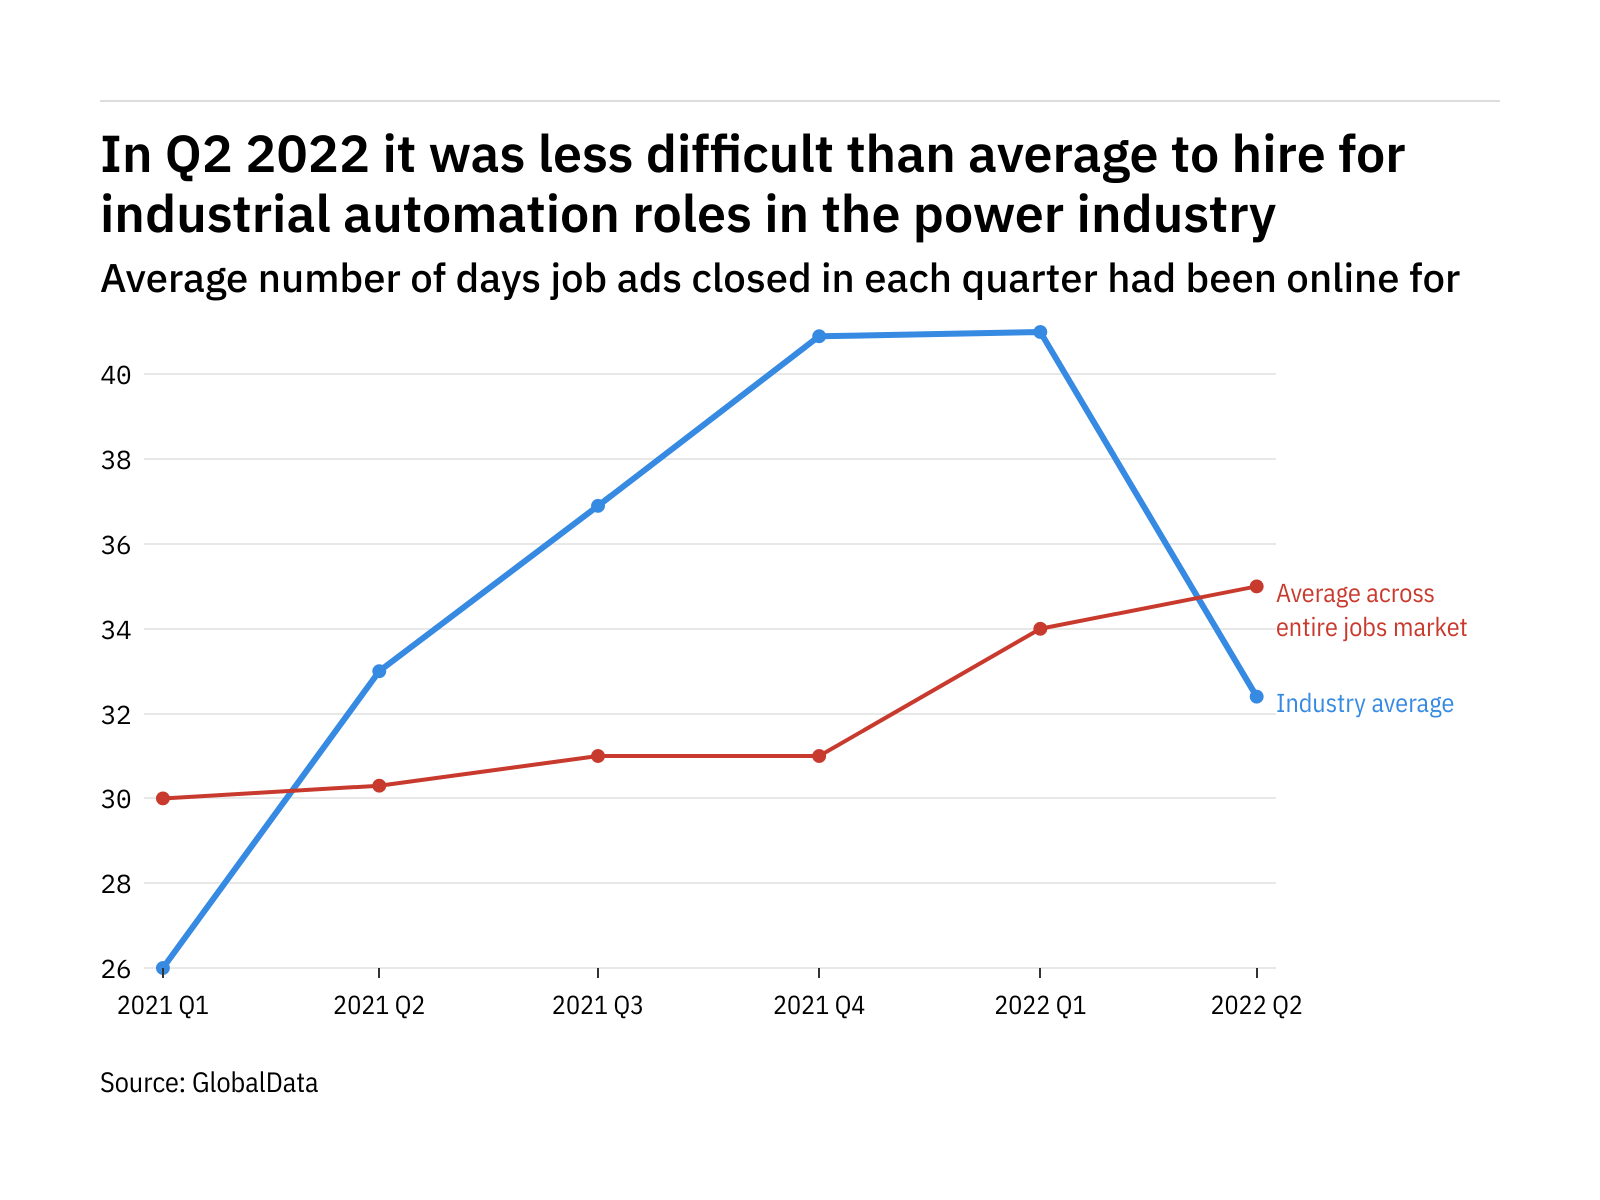 The power industry found it harder to fill industrial automation vacancies in Q2 2022